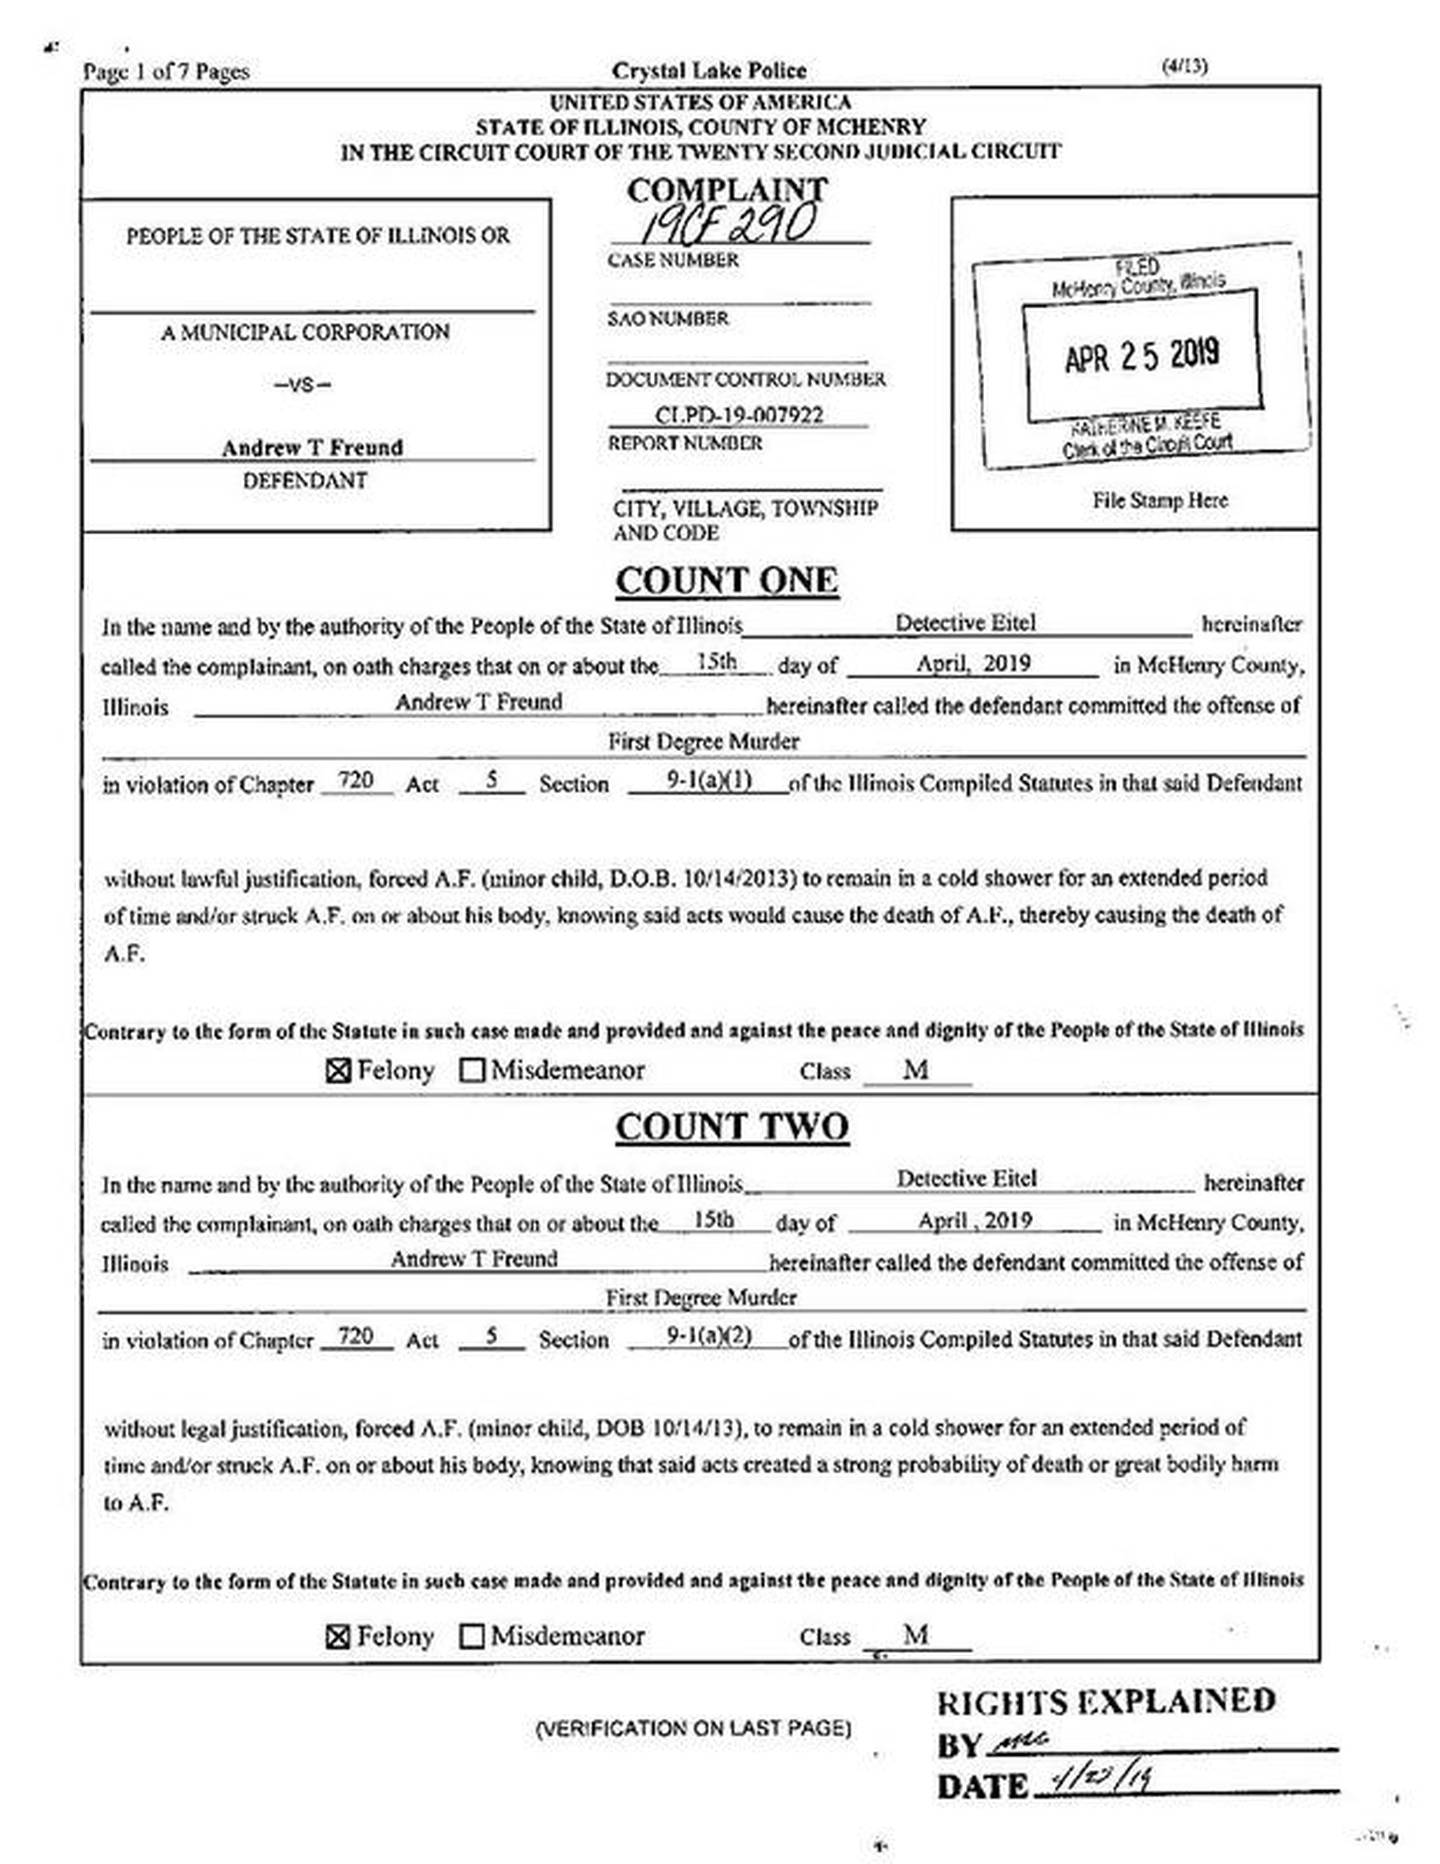 A complaint for charges against Andrew Freund.